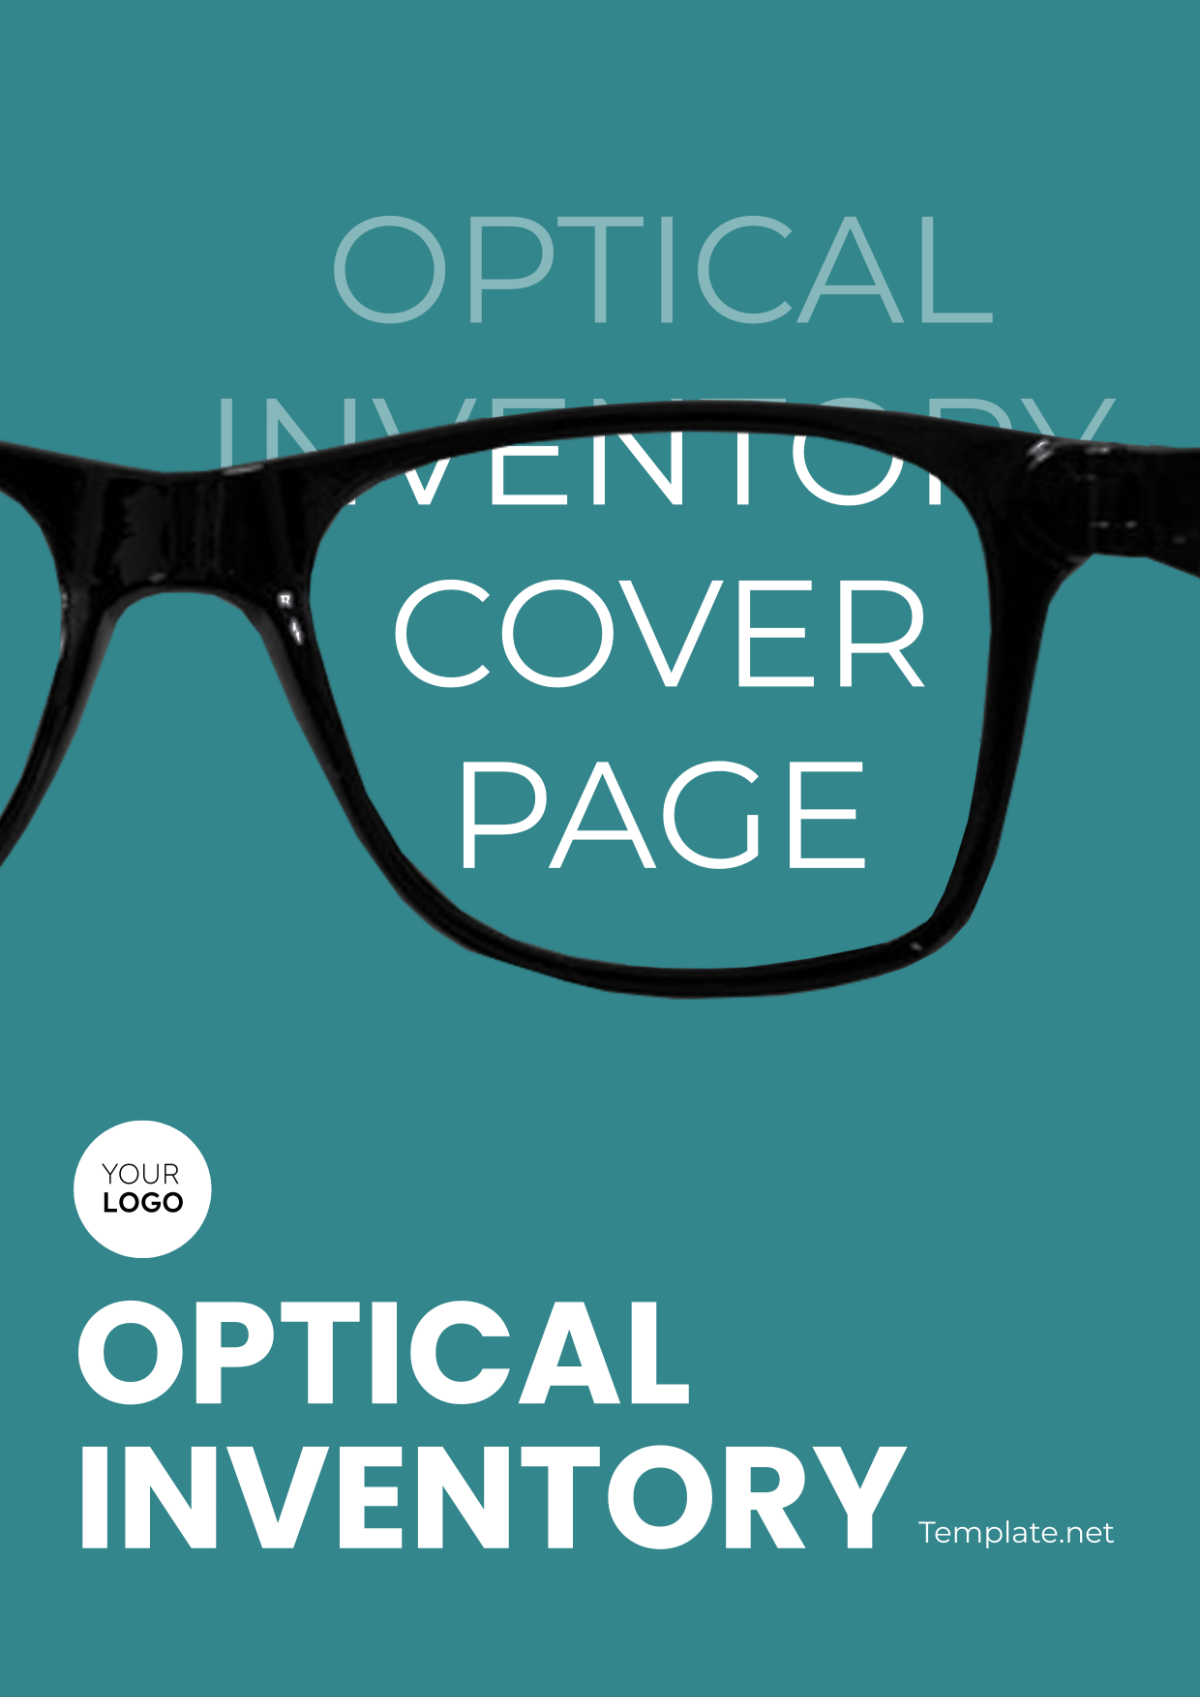 Optical Inventory Cover Page Template